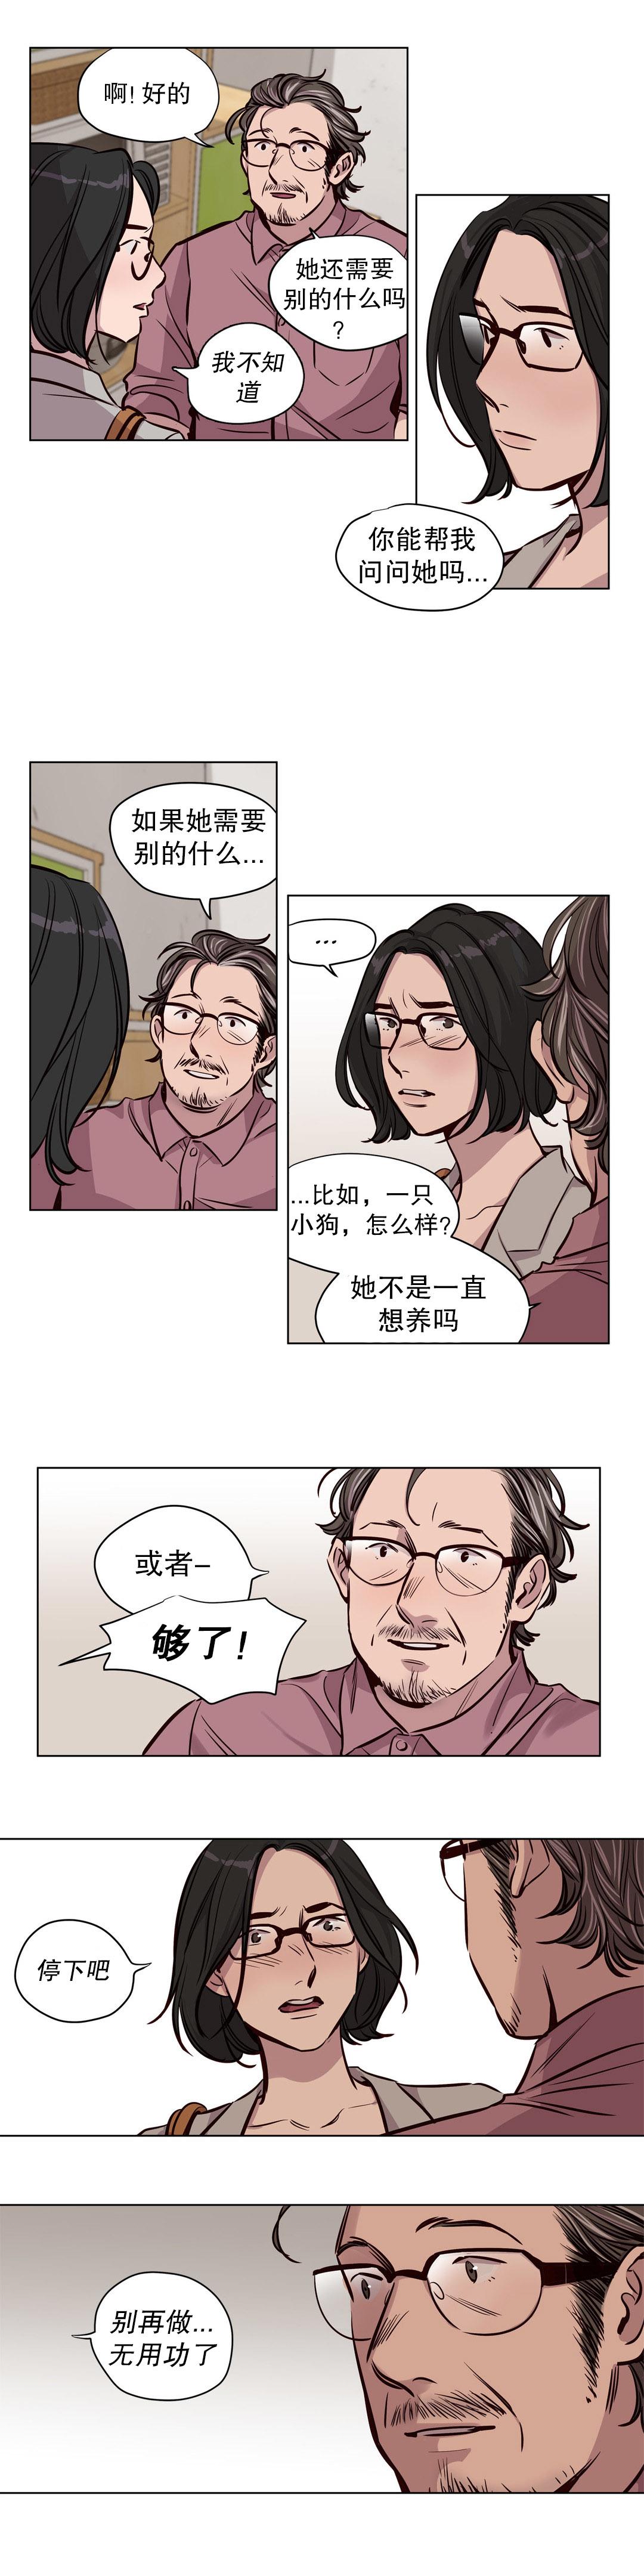 [Ramjak] 赎罪营(Atonement Camp) Ch.50-51 (Chinese) 6